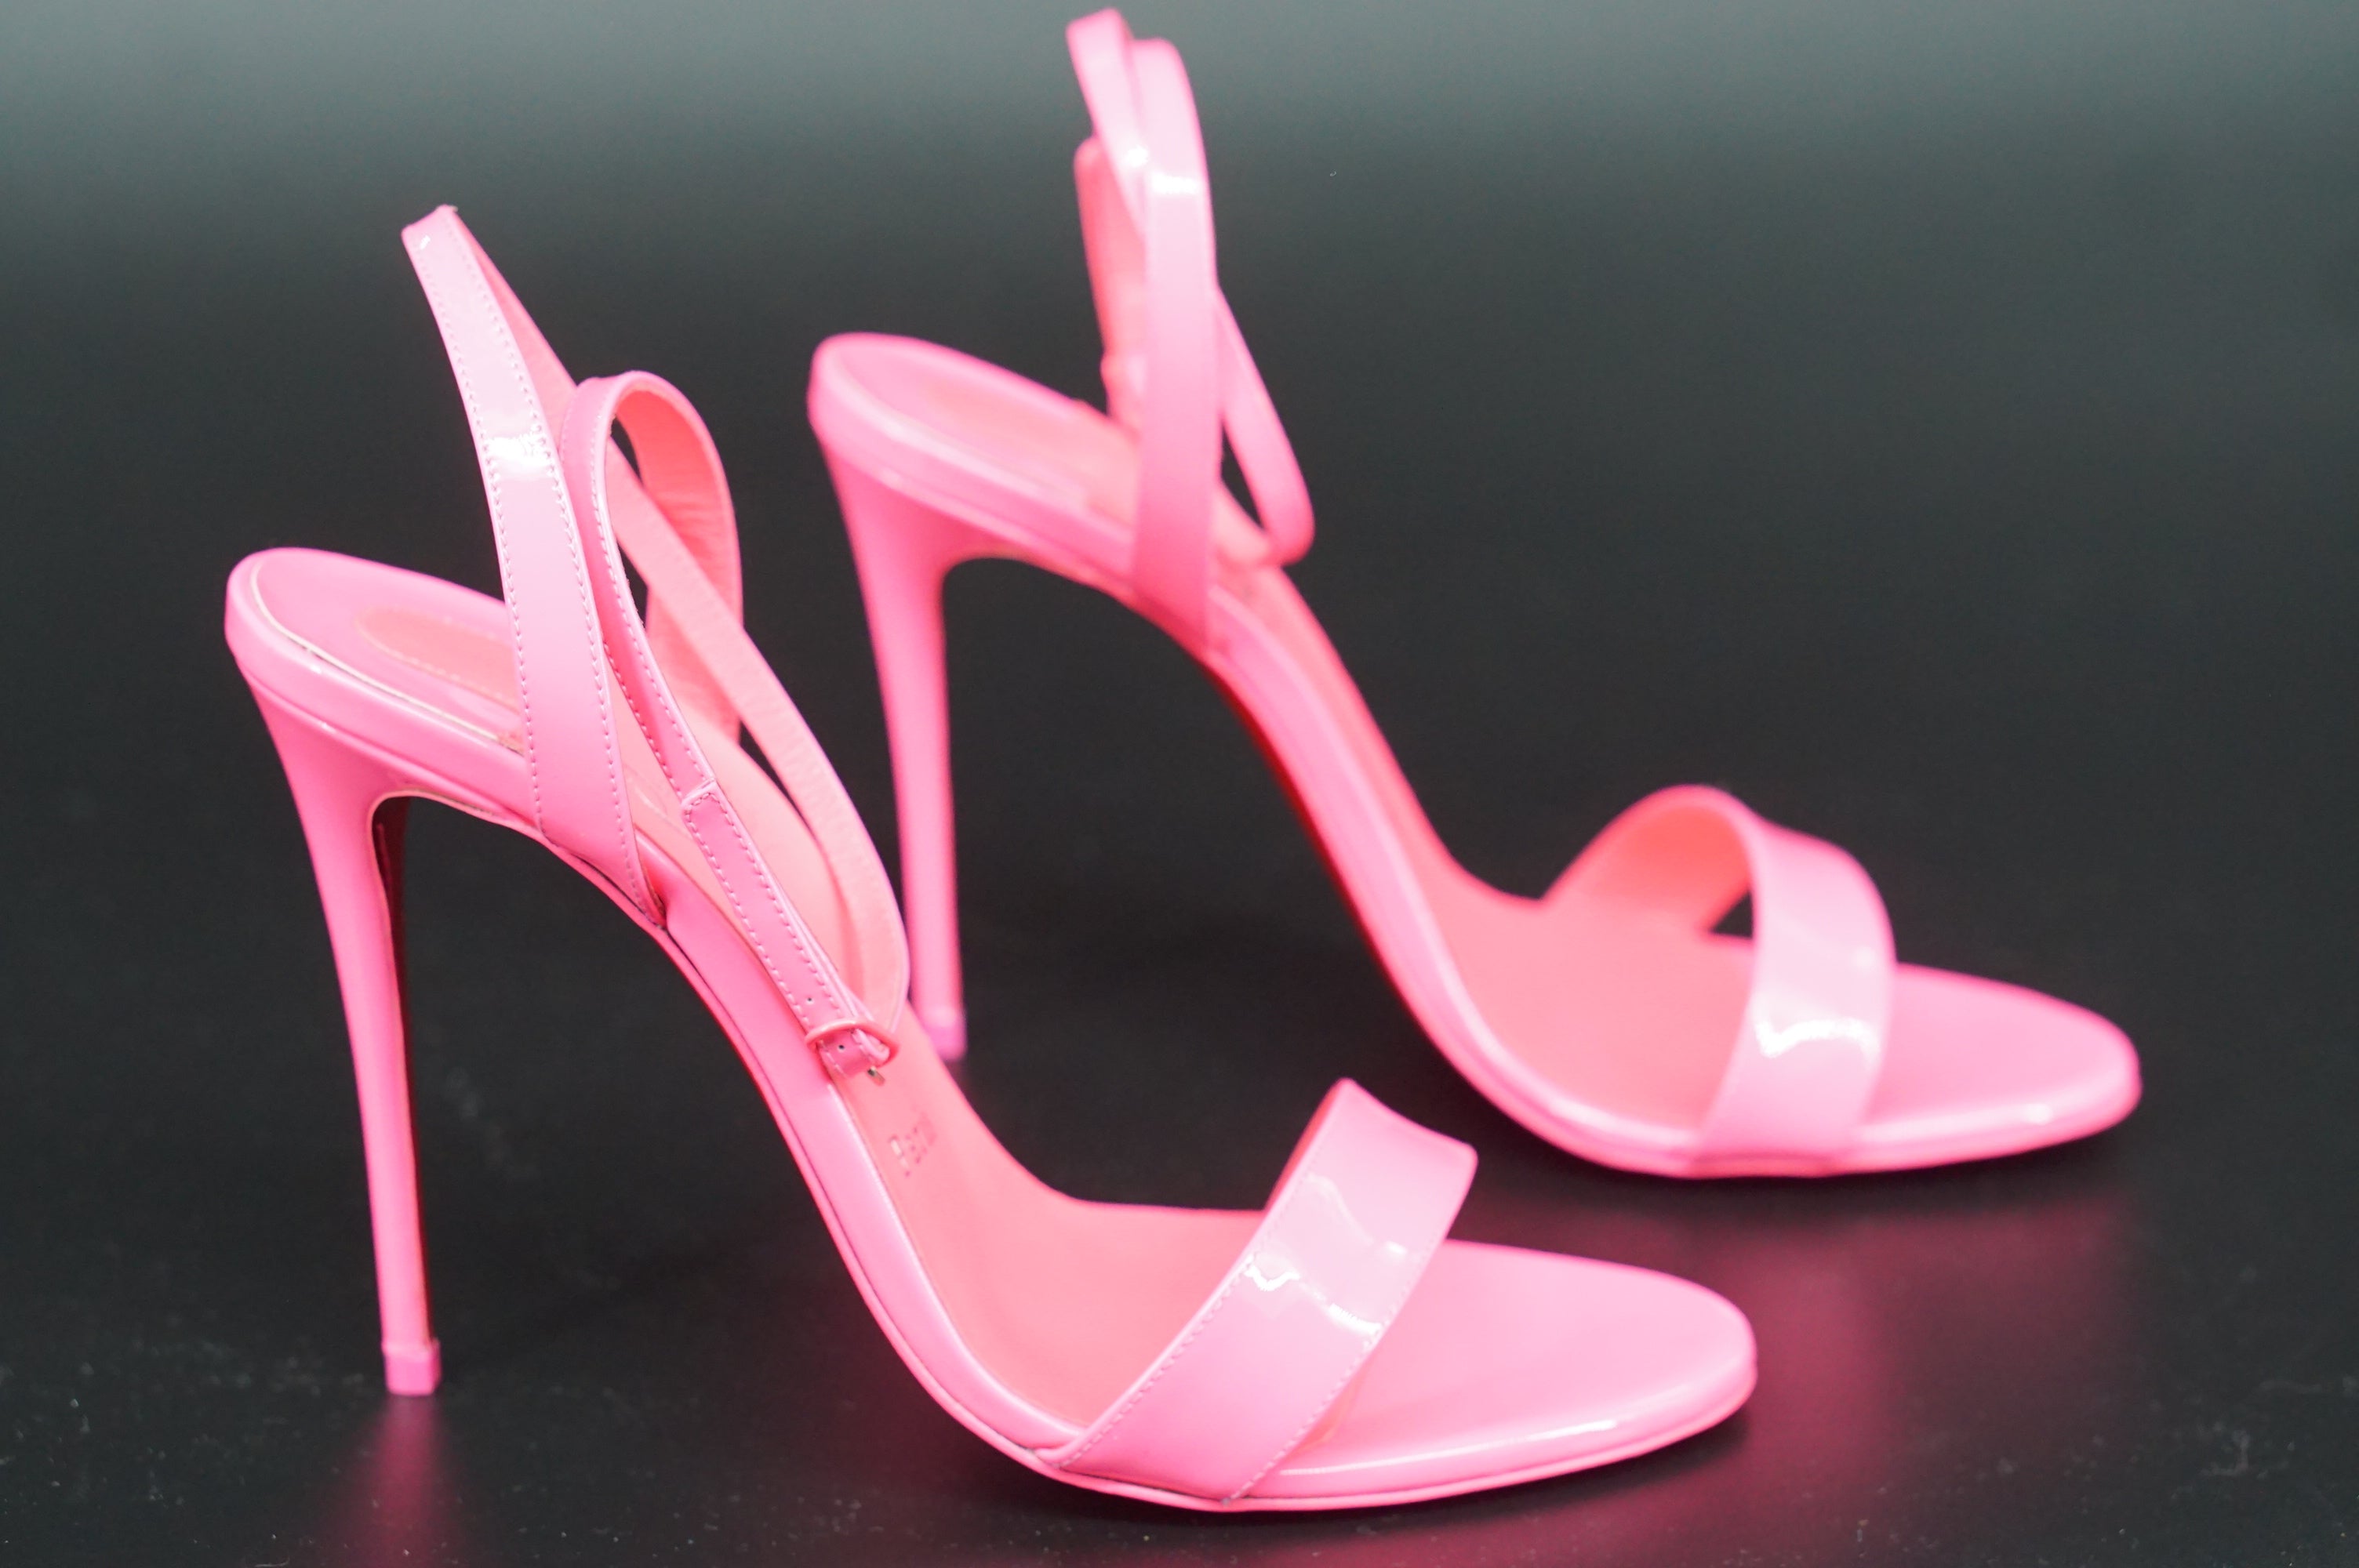 Christian Louboutin Loubi Girl Ankle Sandals Pumps Size 37.5 $875 Pink Patent